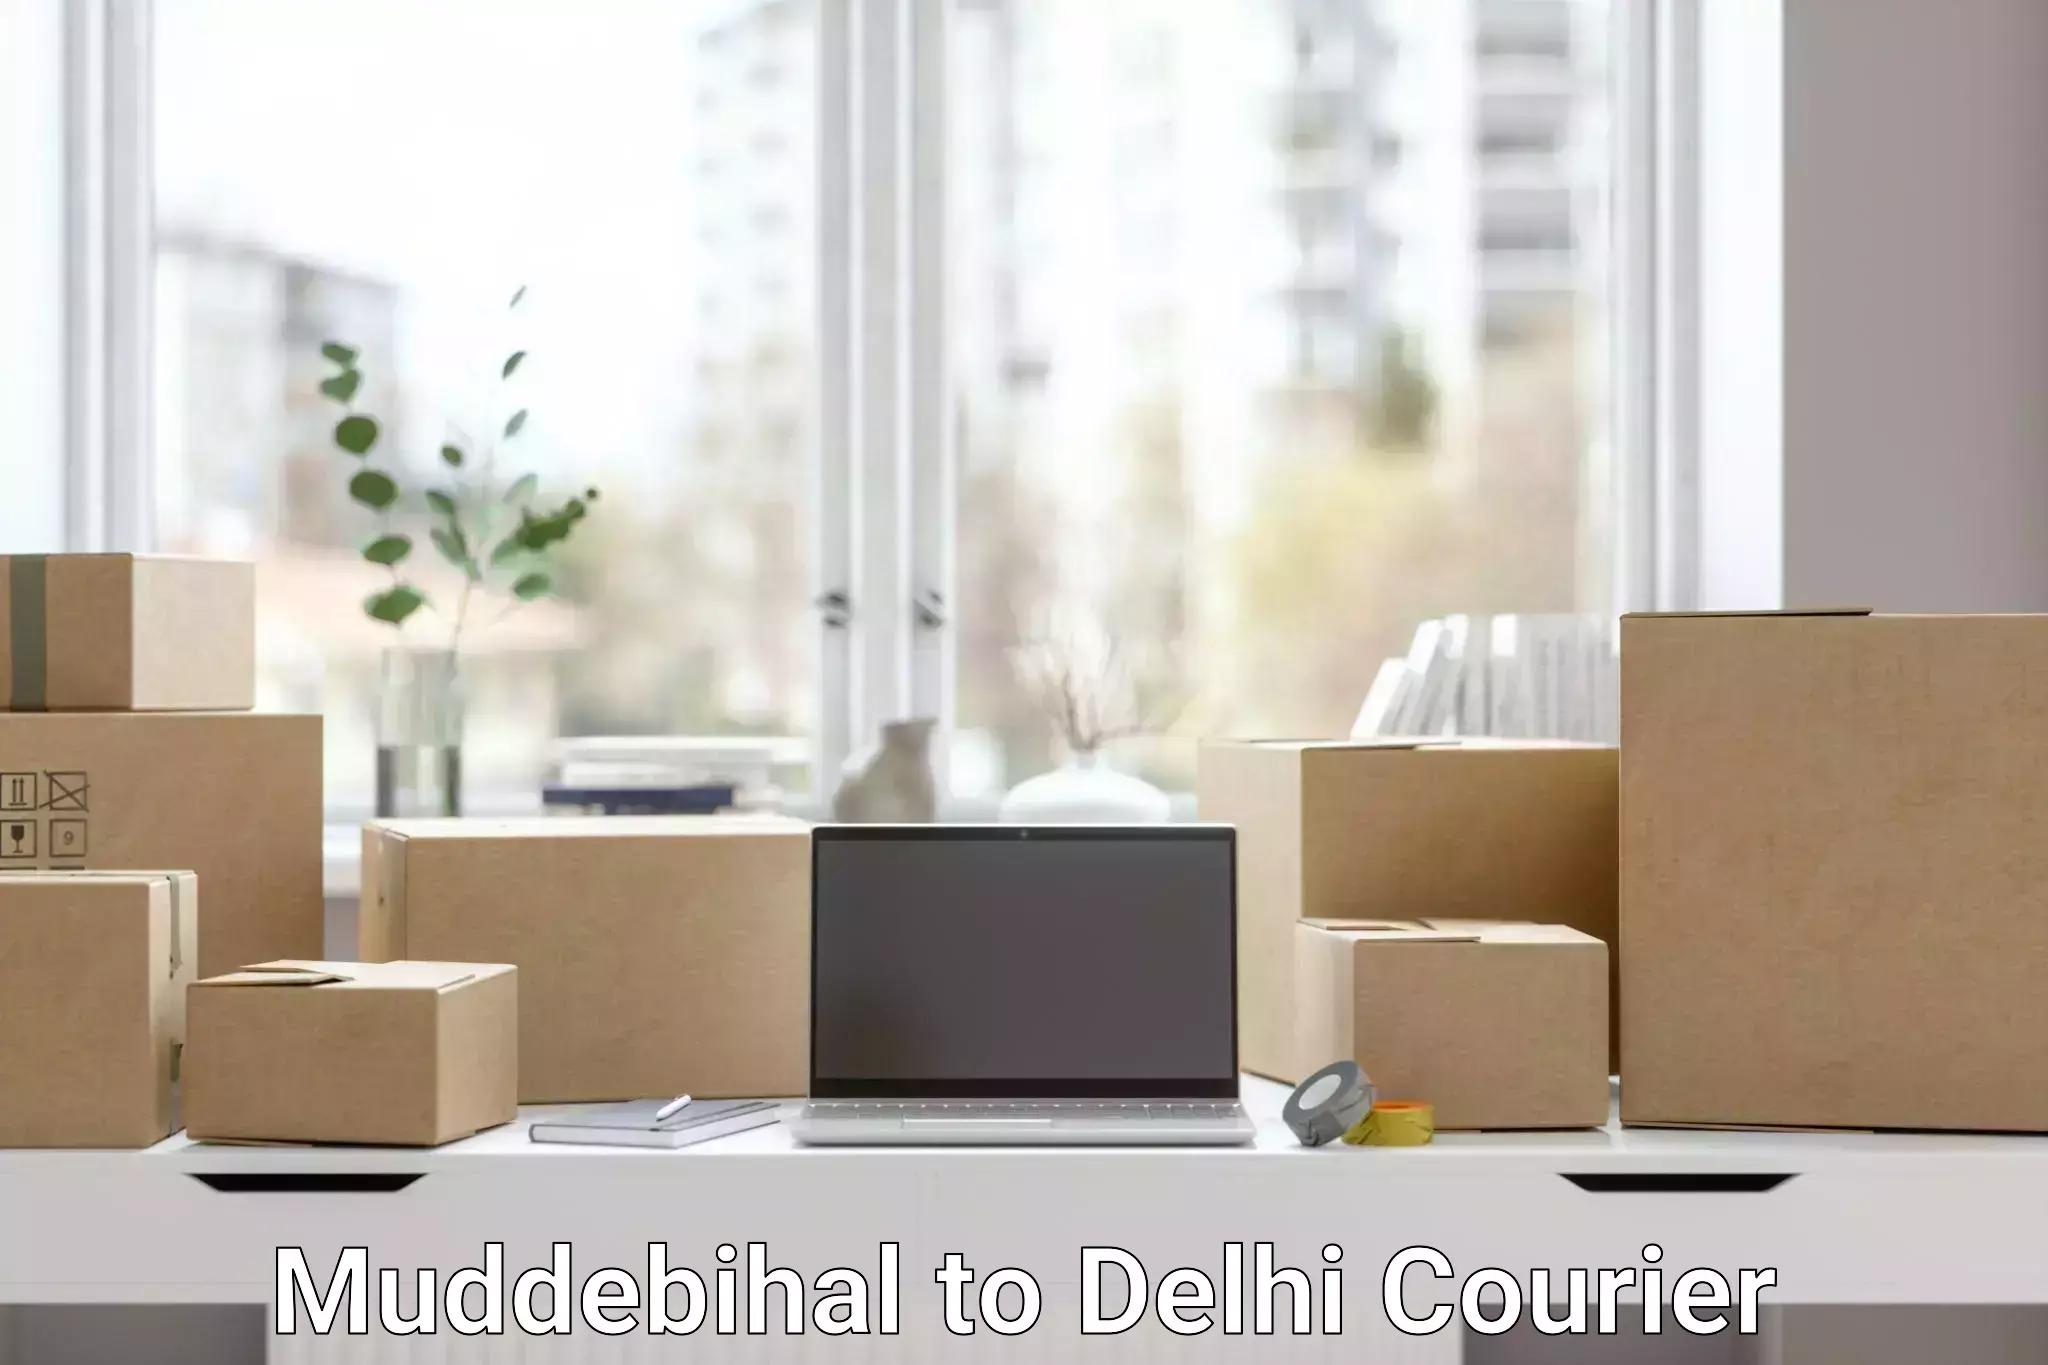 Customizable shipping options Muddebihal to Lodhi Road